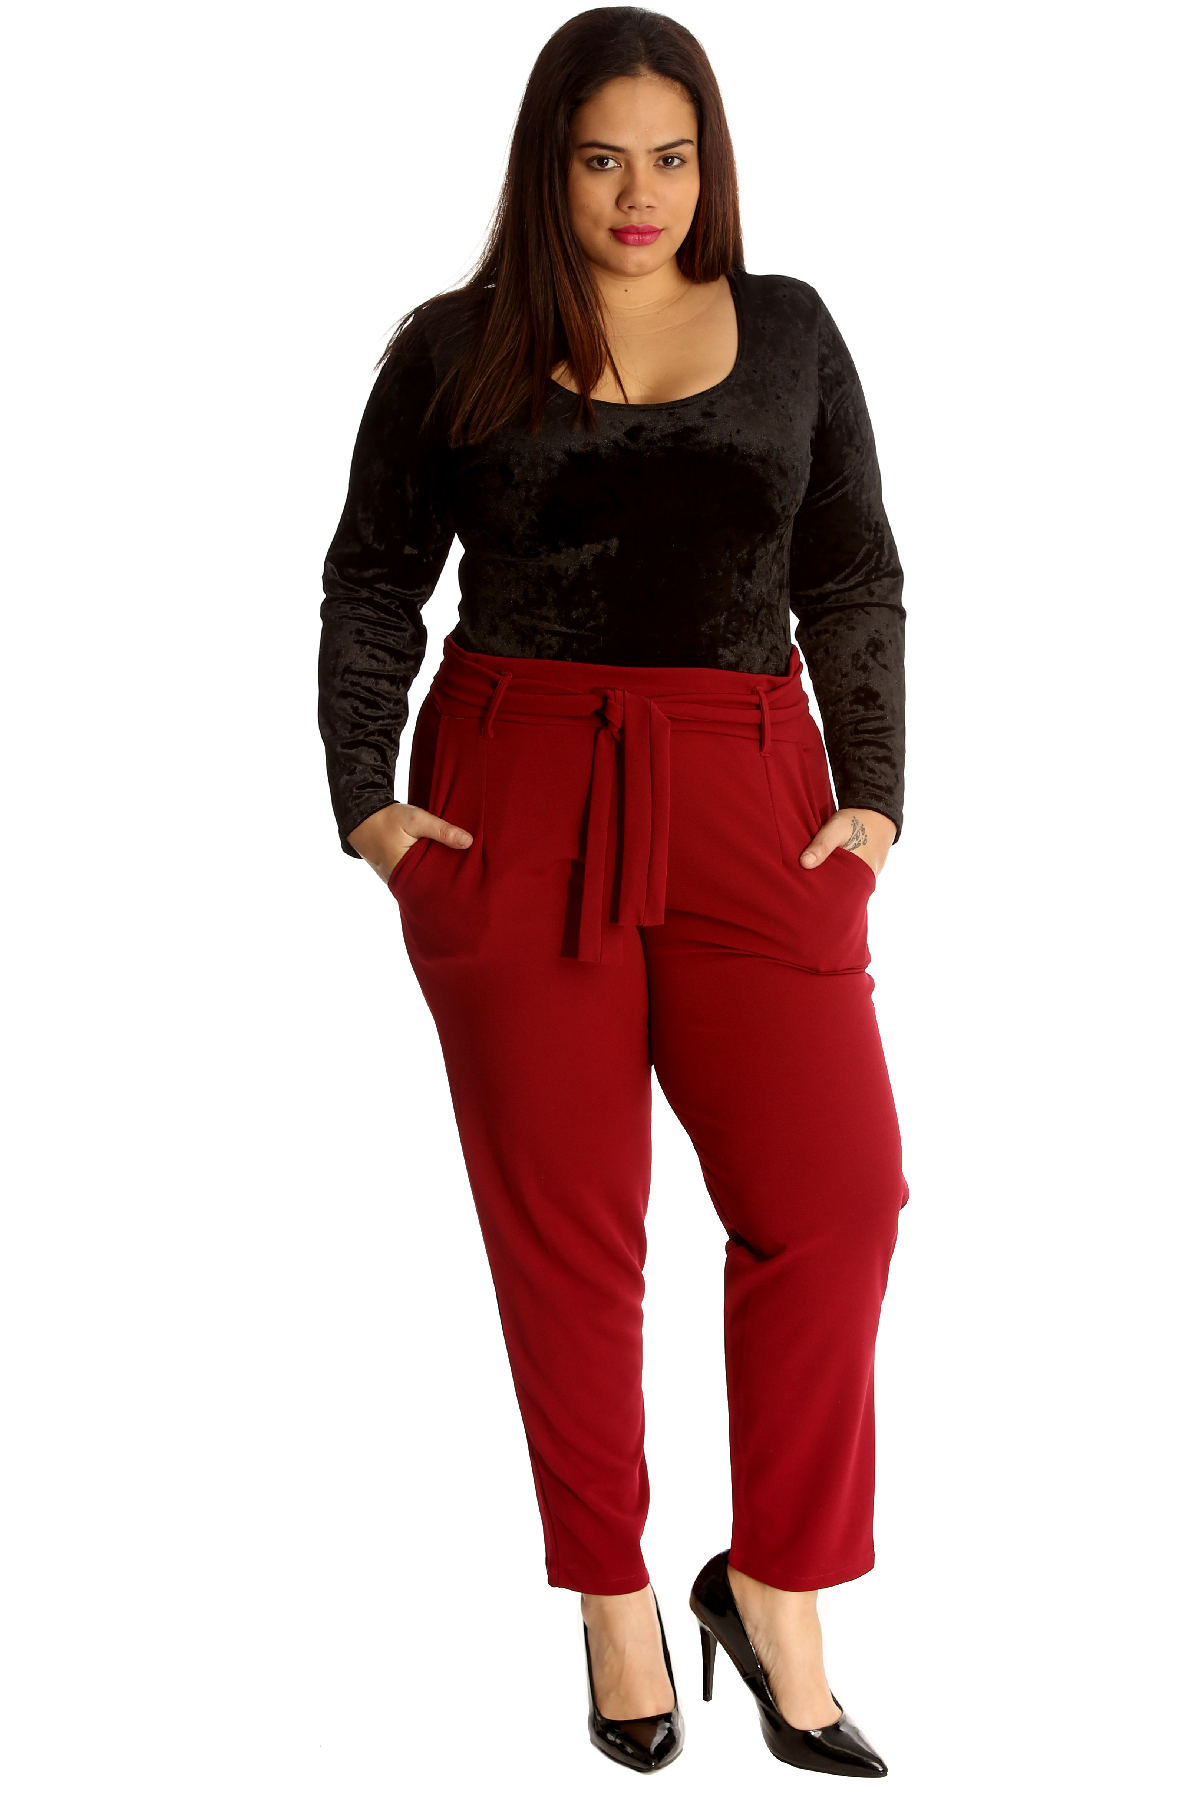 New Womens Plus Size Trousers Ladies 